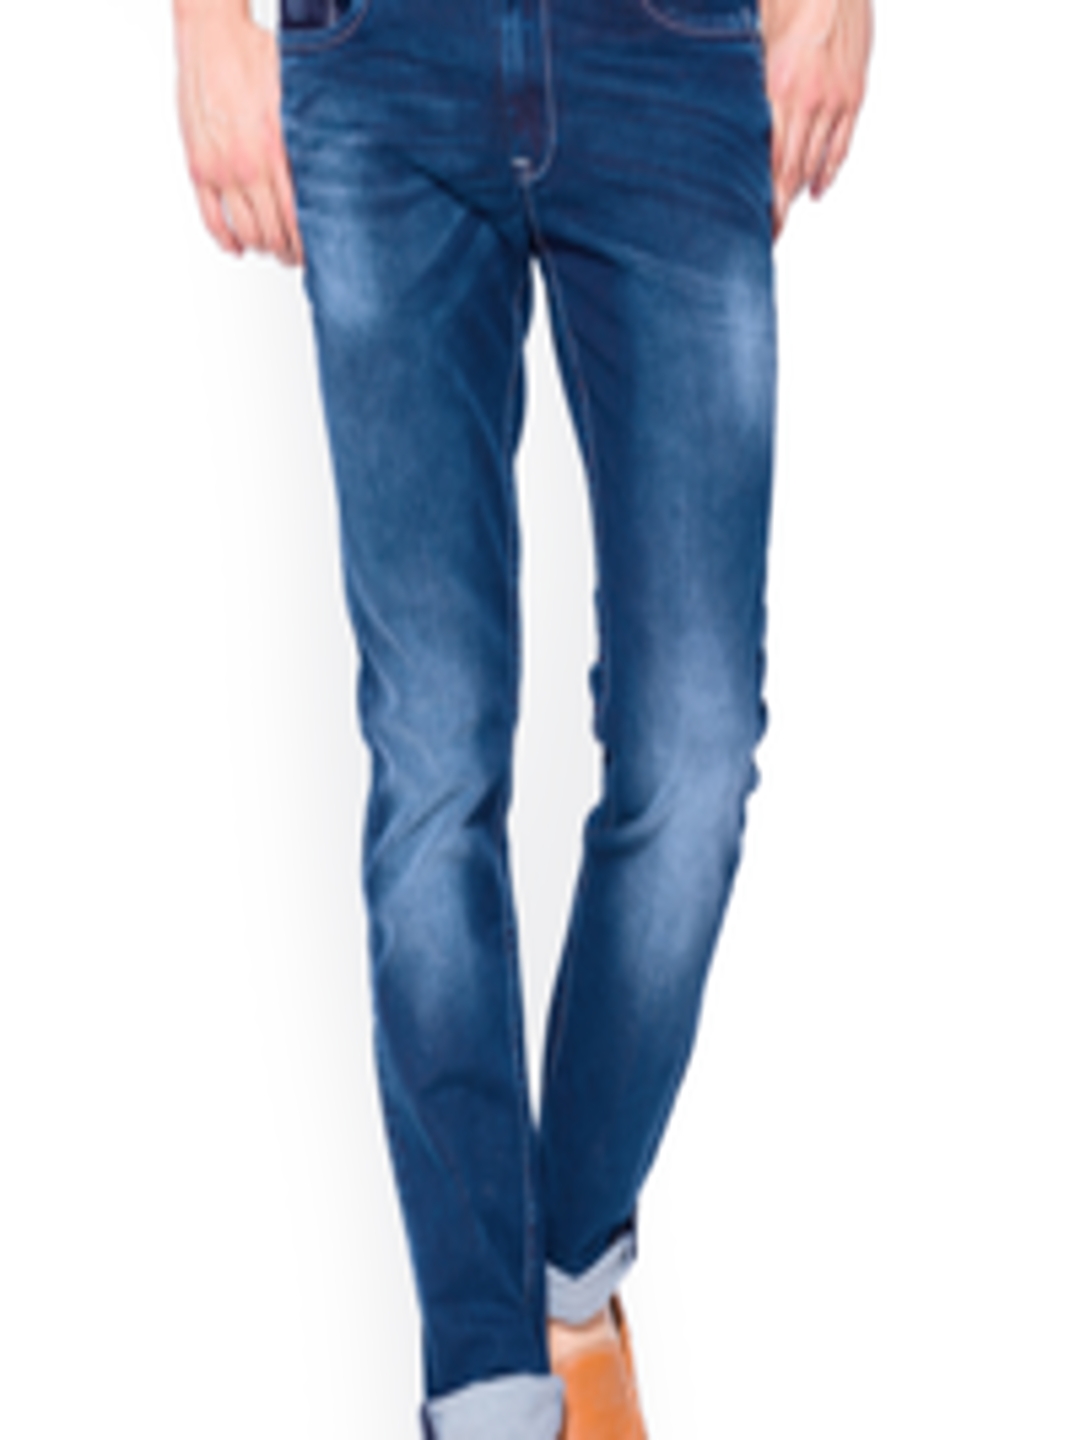 Buy Mufti Blue Narrow Fit Mid Rise Jeans - Jeans for Men 1168581 | Myntra